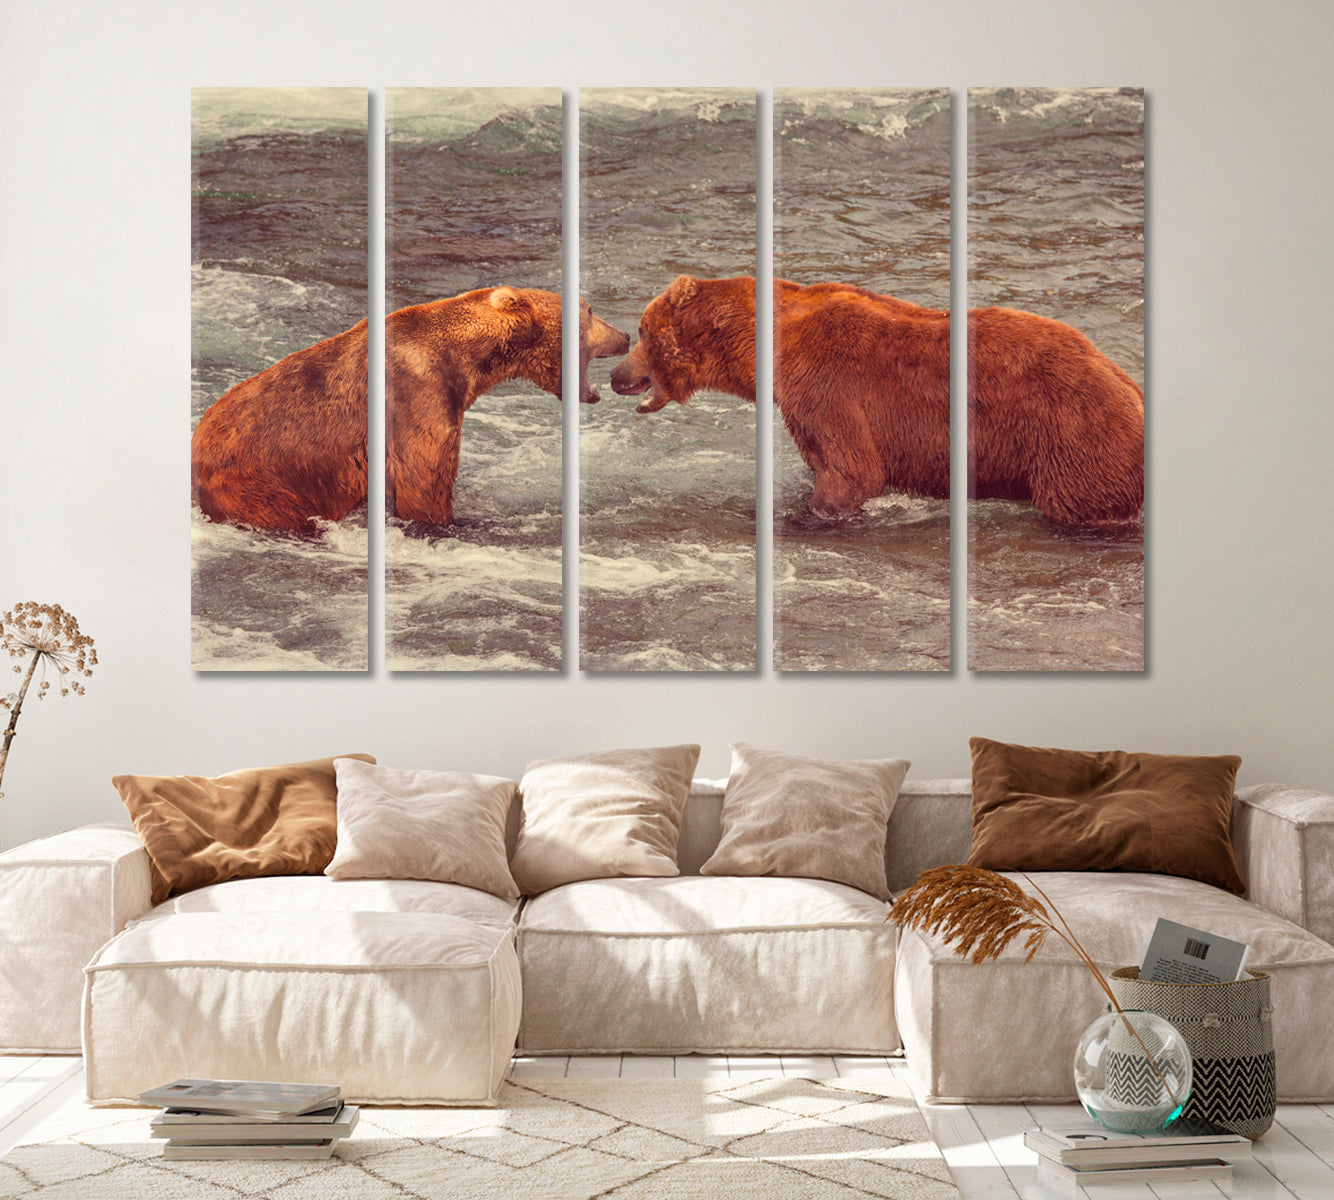 Grizzly Bears Hunting Salmon at Brooks Falls Alaska Canvas Print ArtLexy 5 Panels 36"x24" inches 